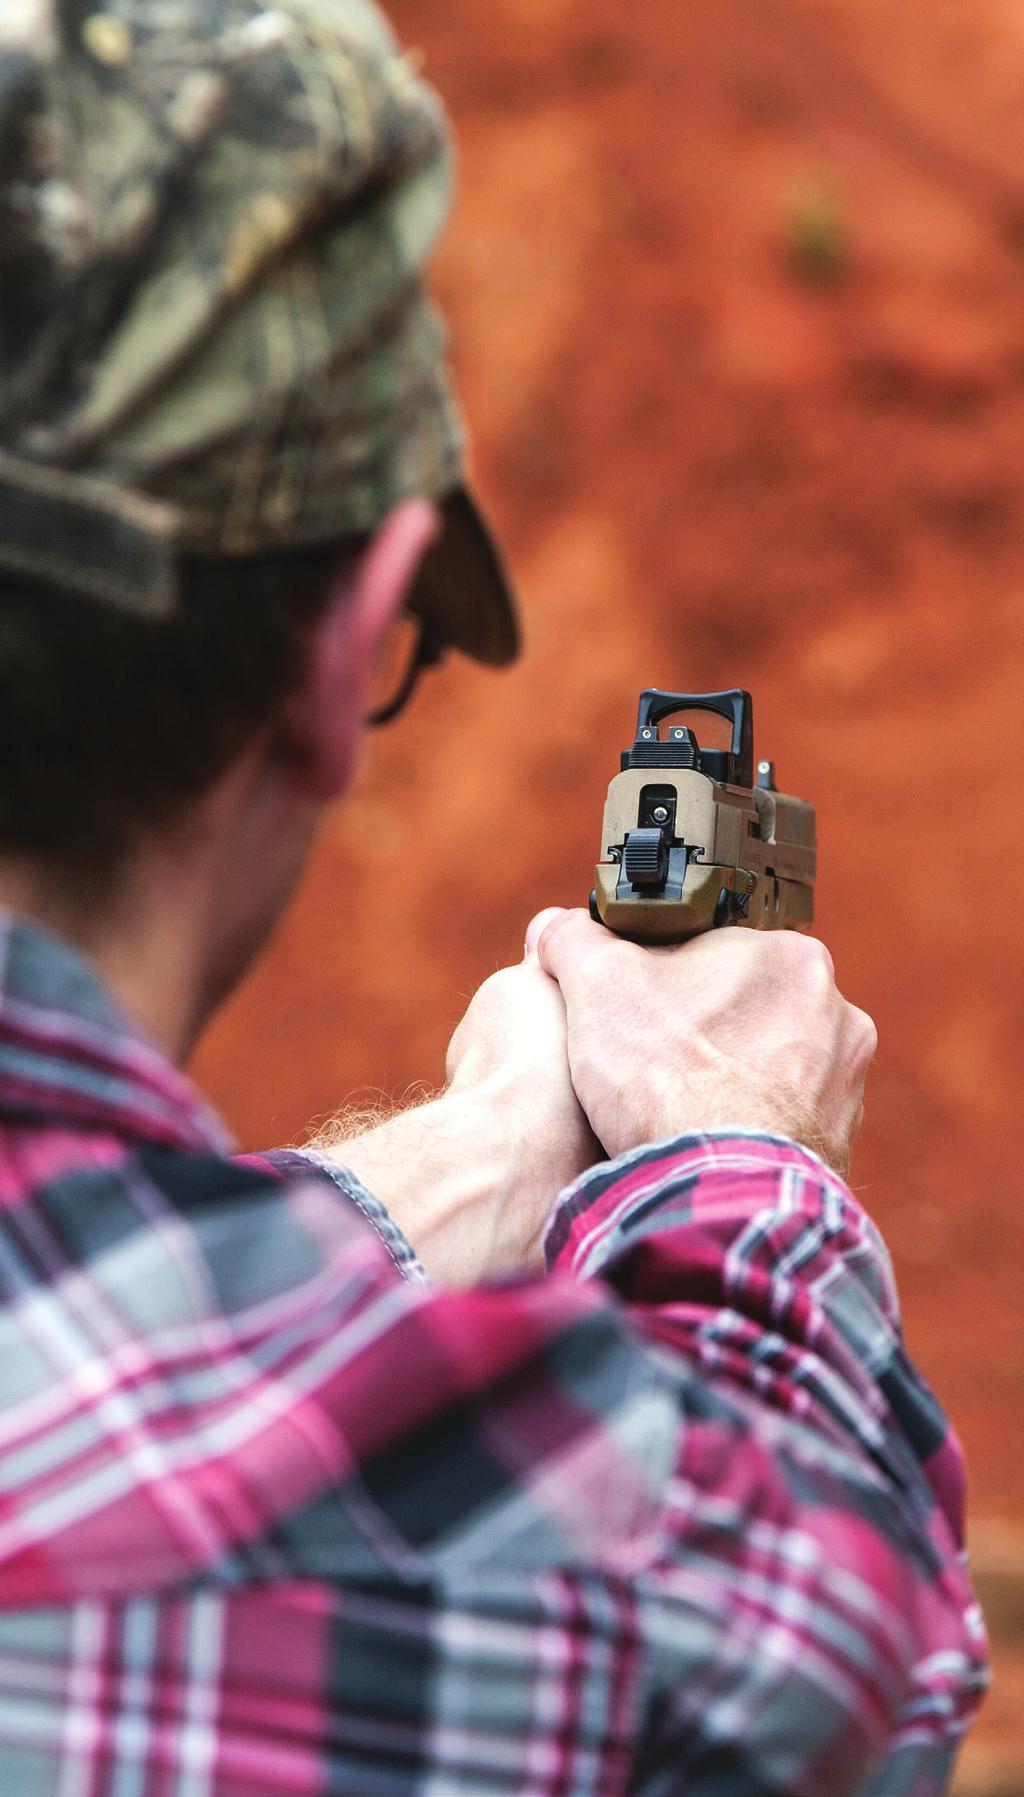 When shooting a shotgun at moving clay targets, always focus on the clay to account for movement.